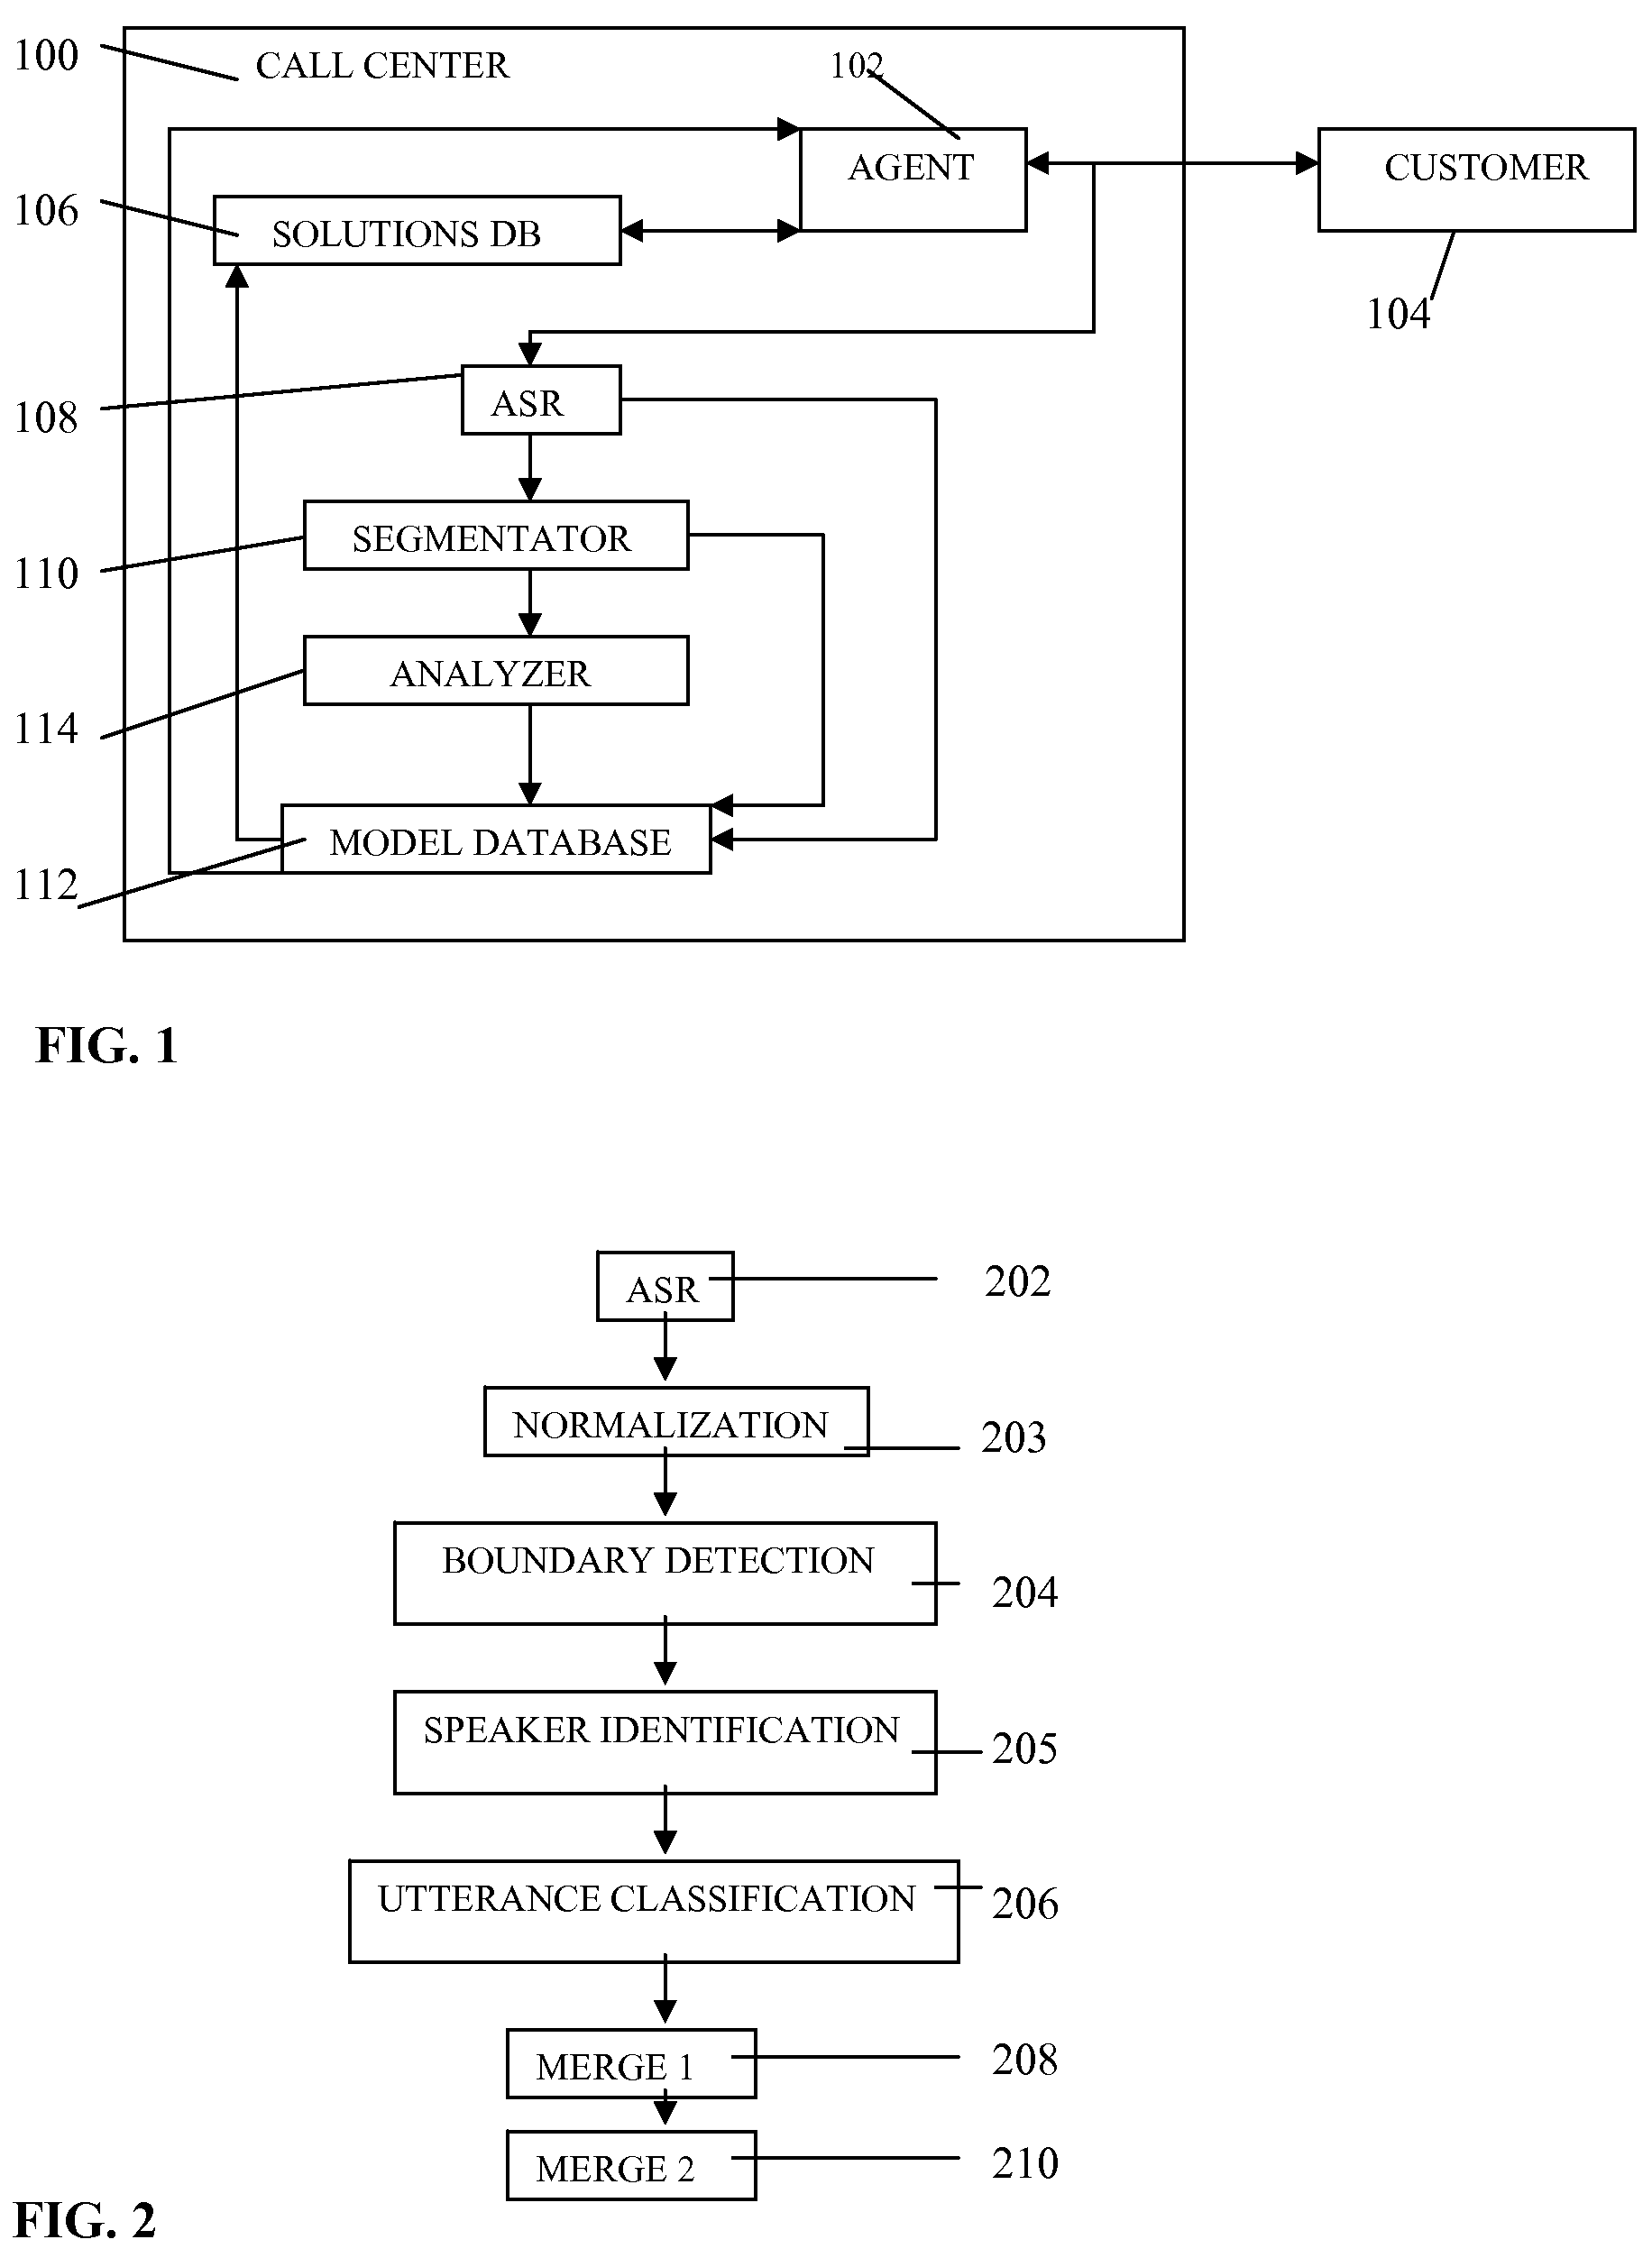 System and method for automatic call segmentation at call center